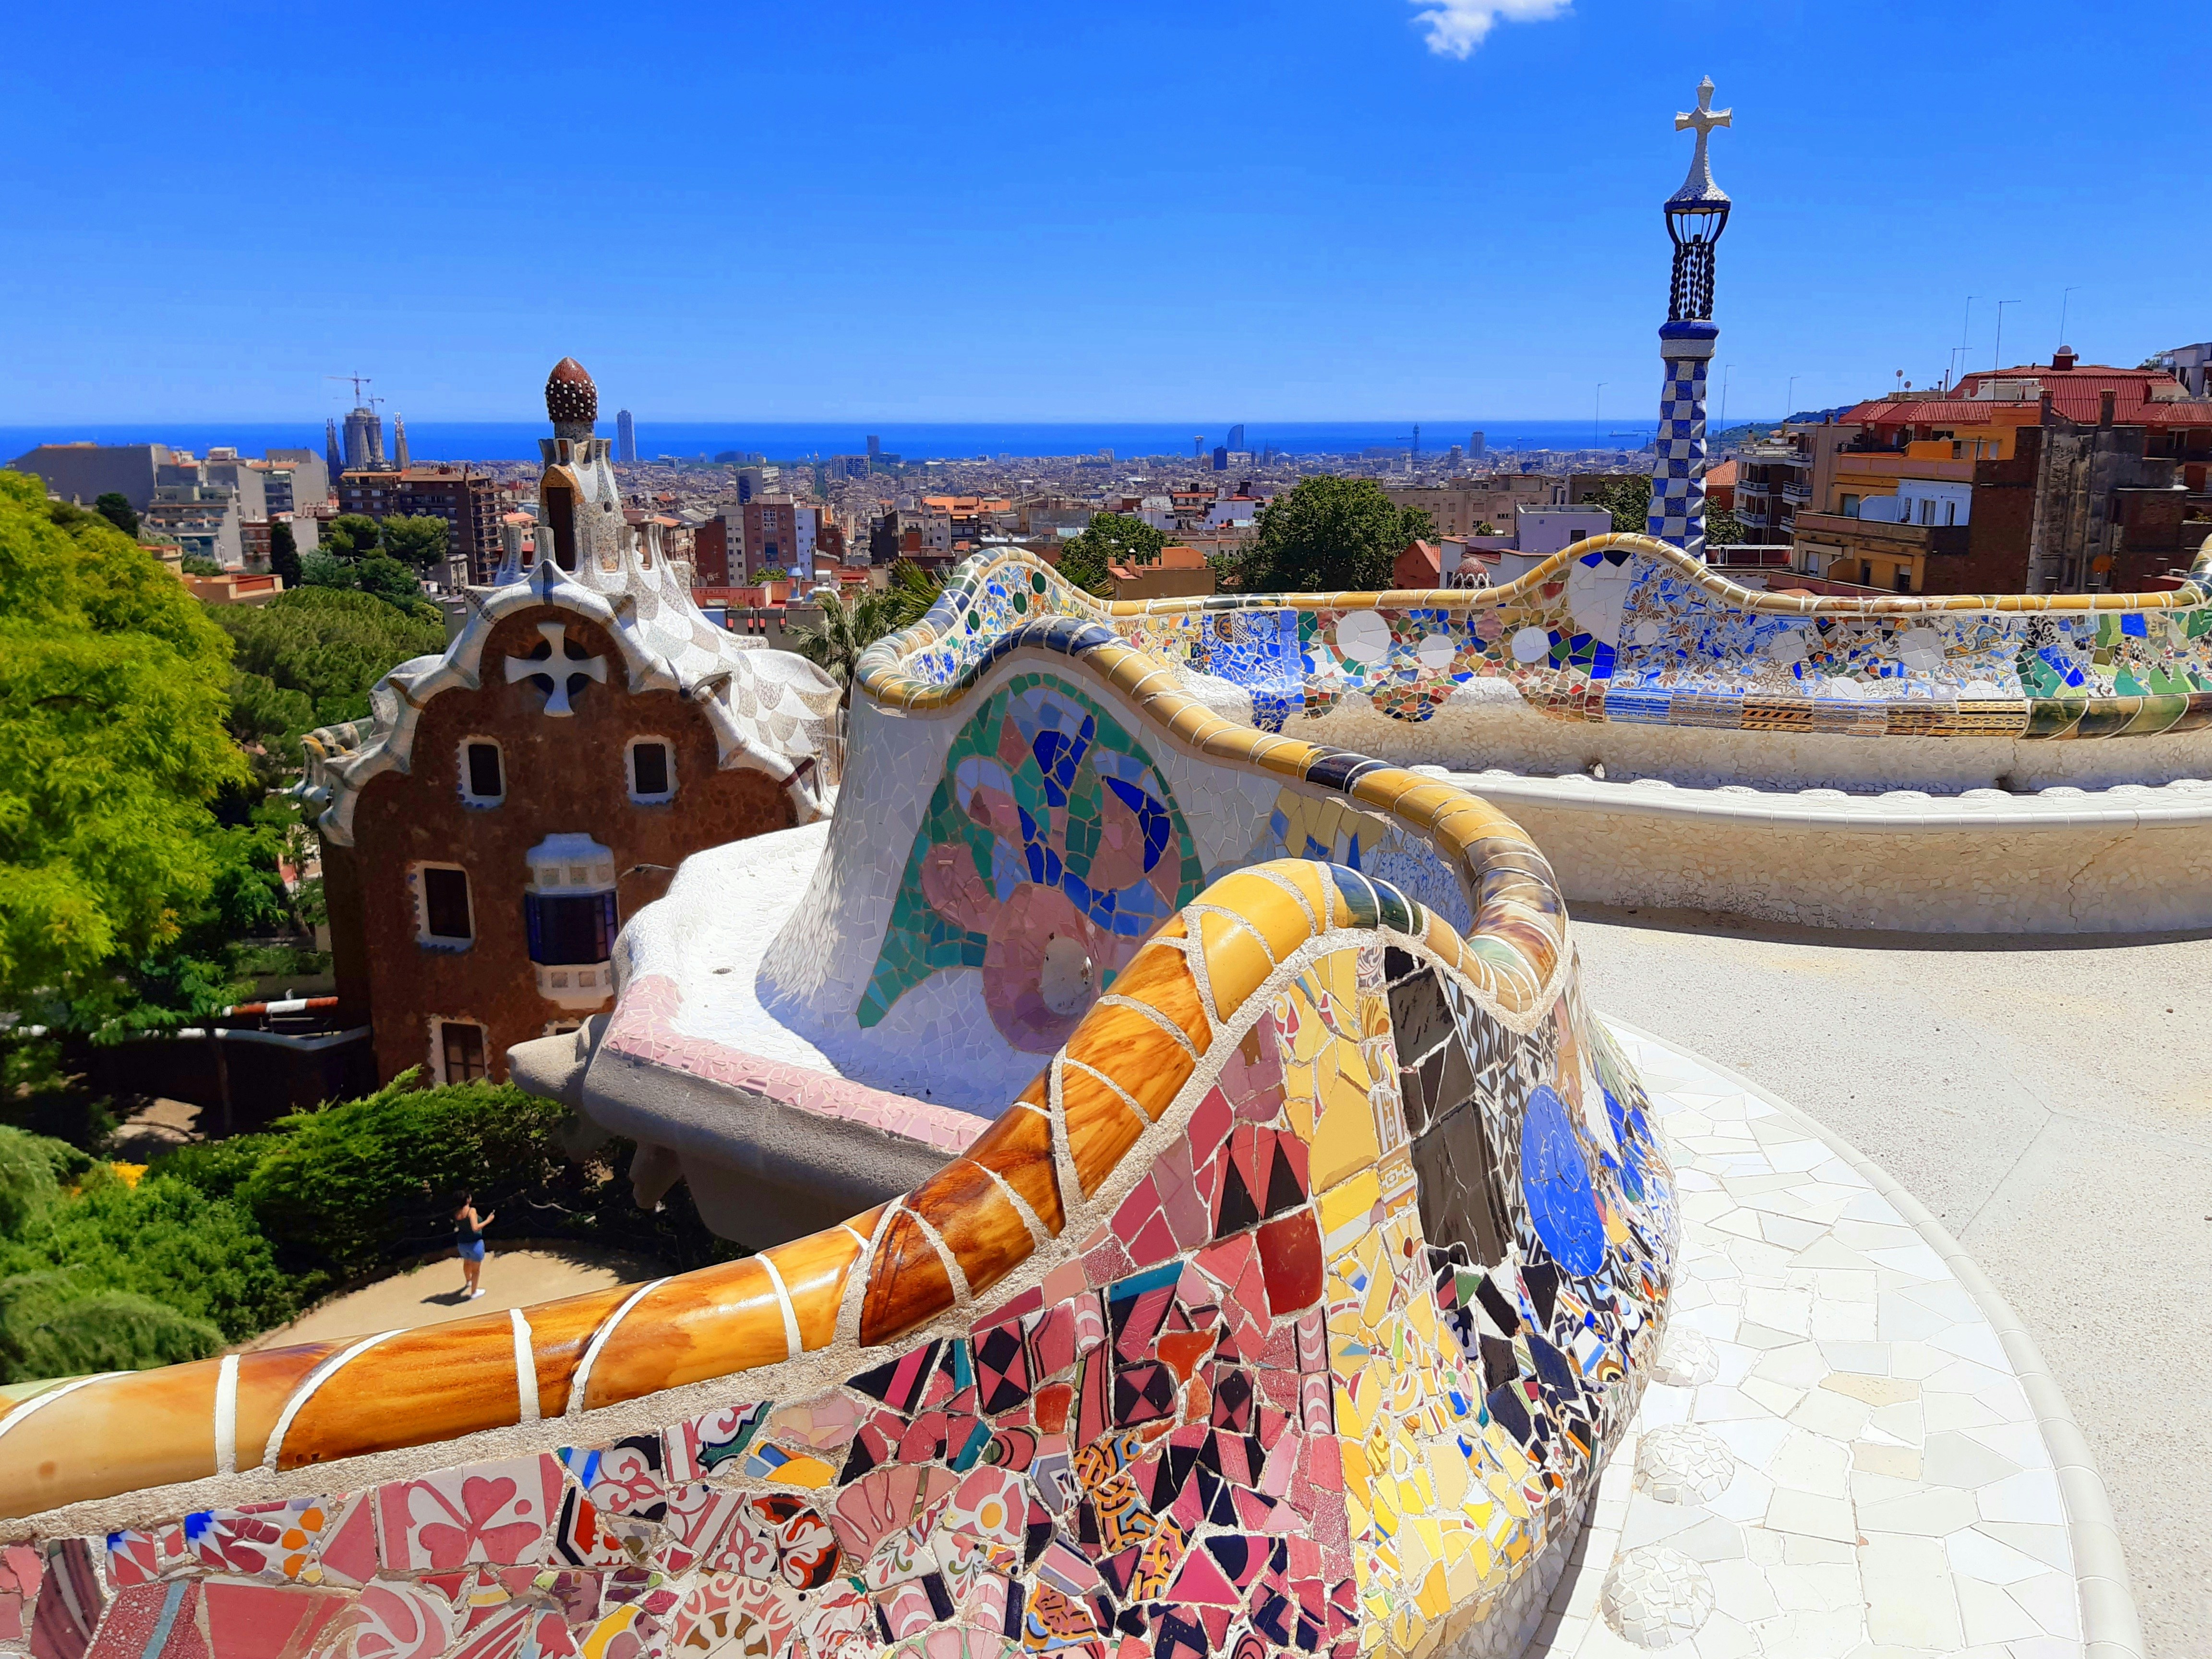 A view from the benches on a aummer day at Park Güell in Barcelona, Spain